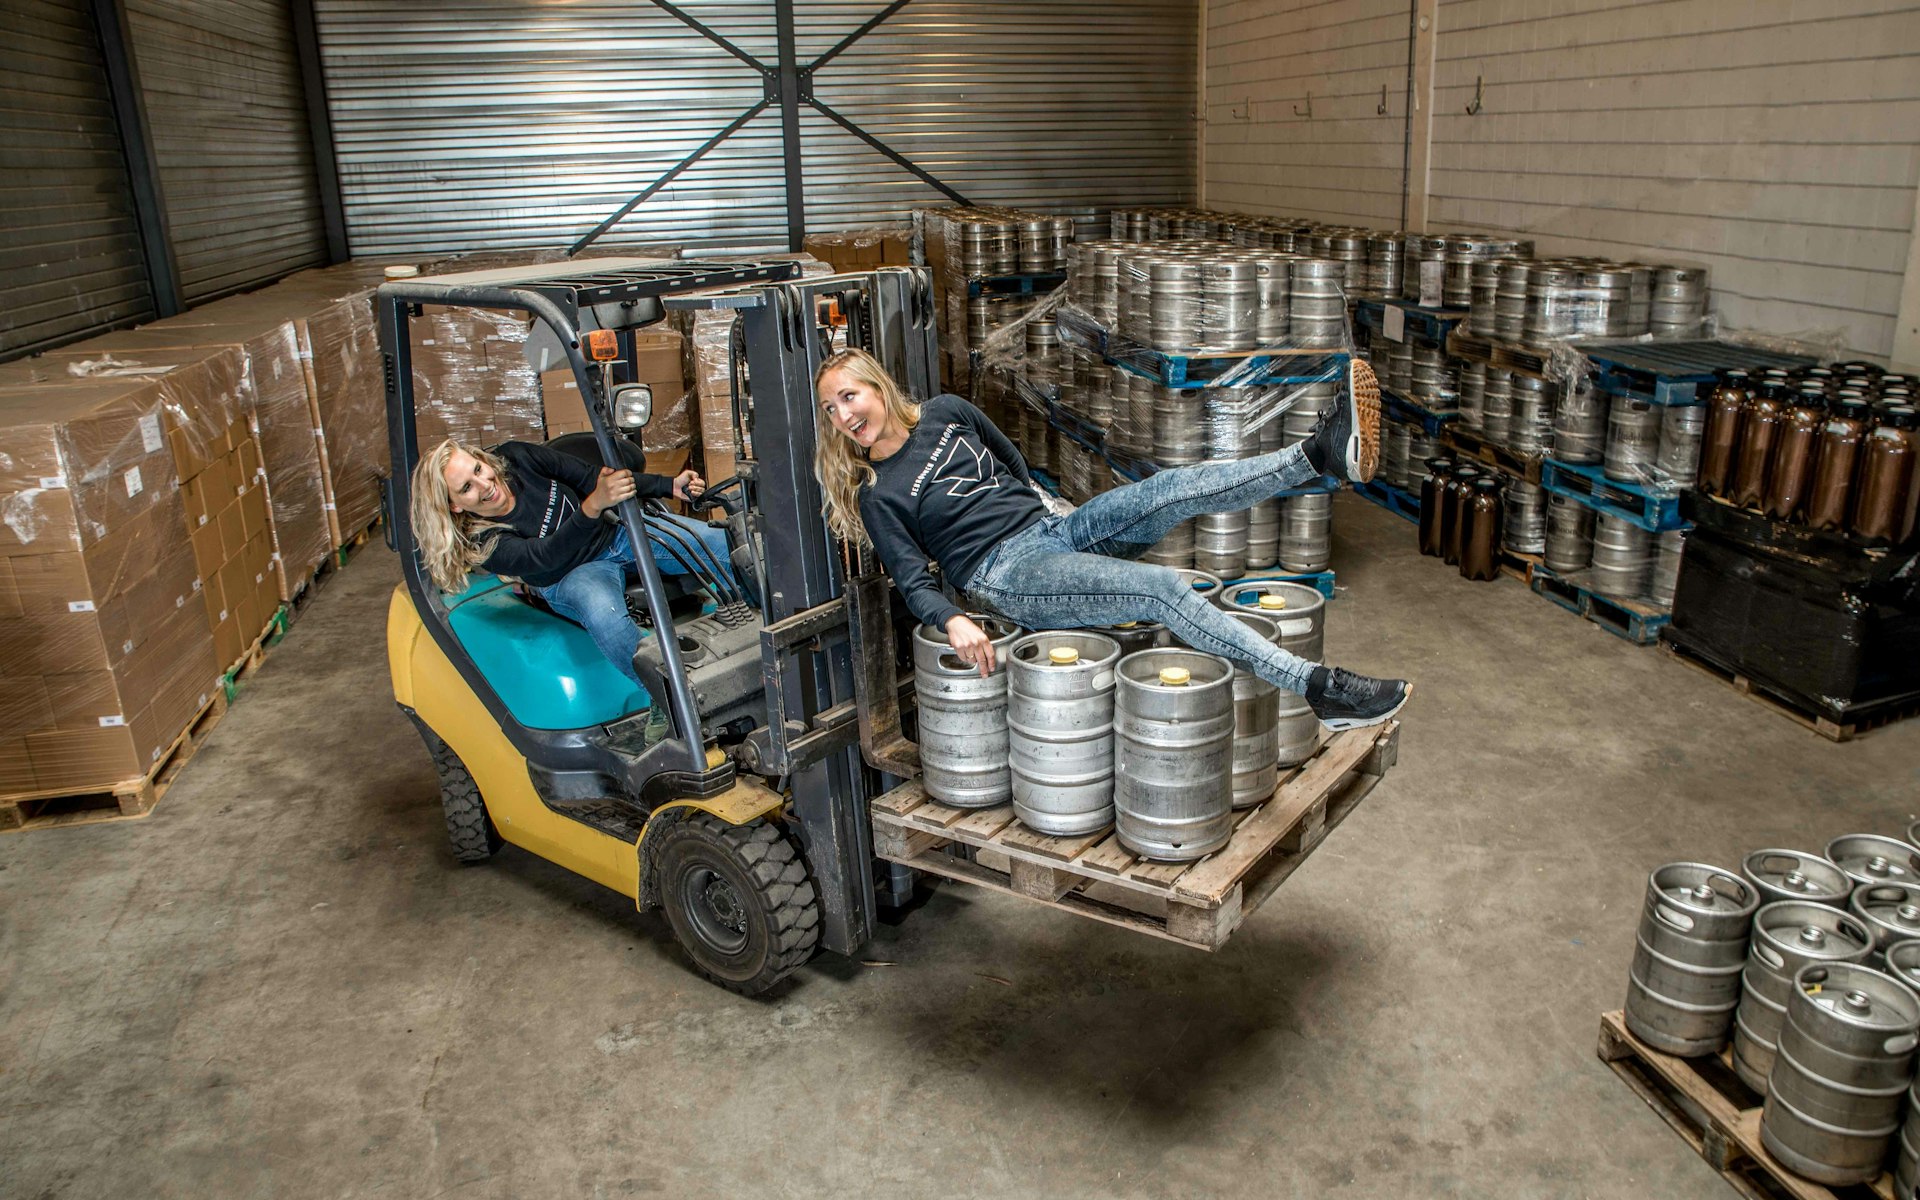 How to quit your job and make beer for a living